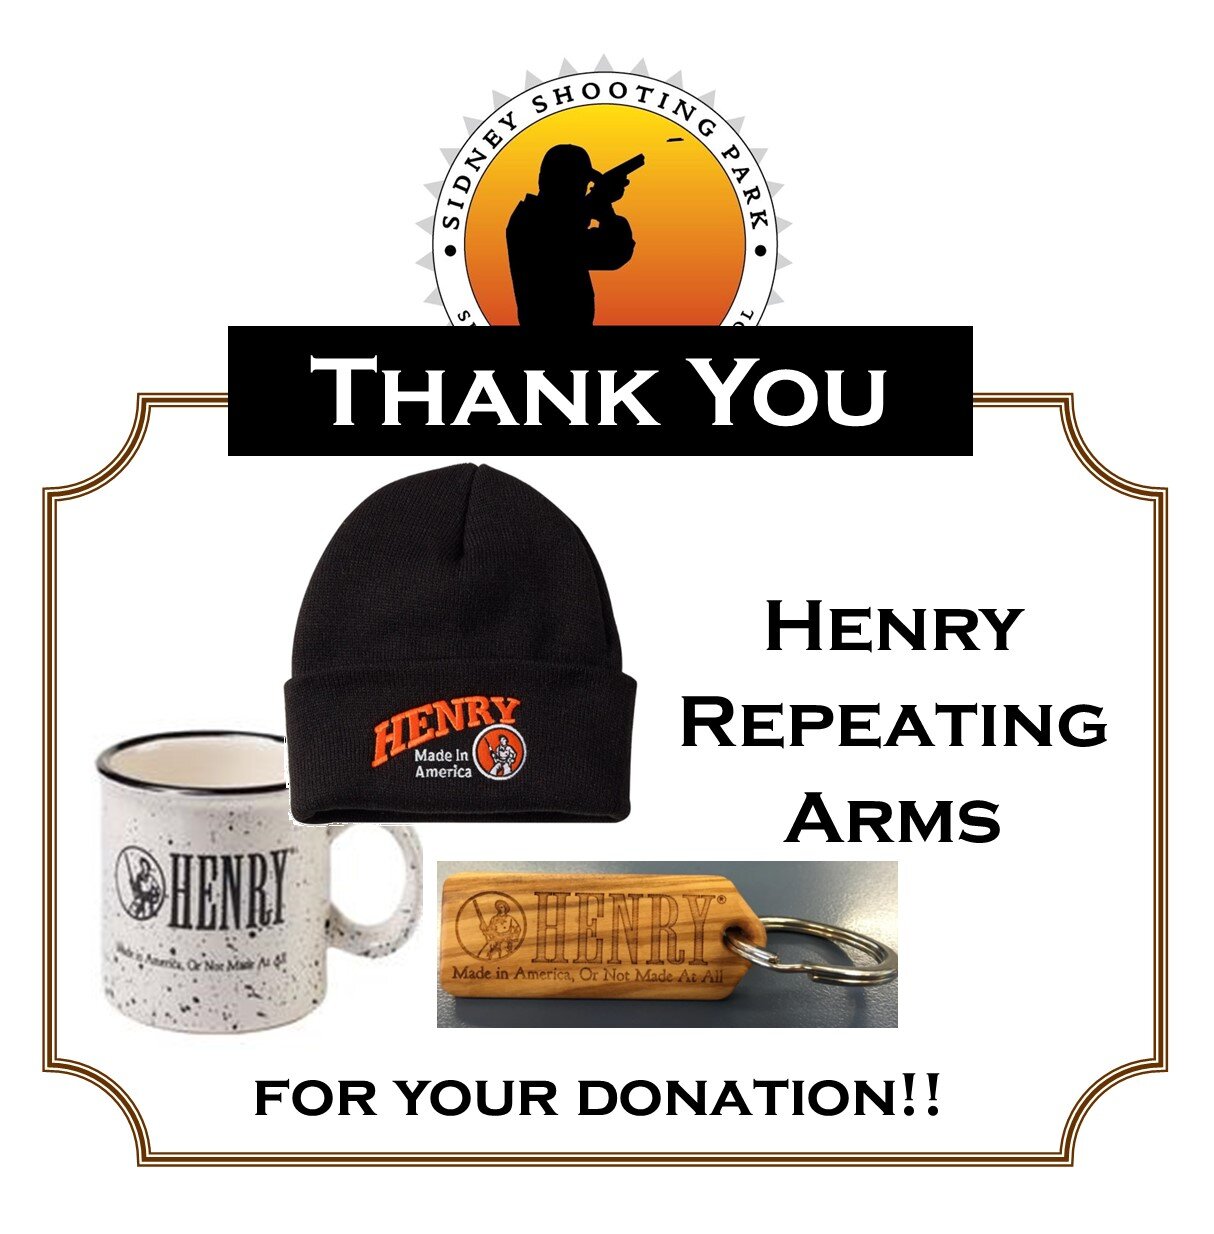 Thank_You_Henry_Repeating_Arms.jpg